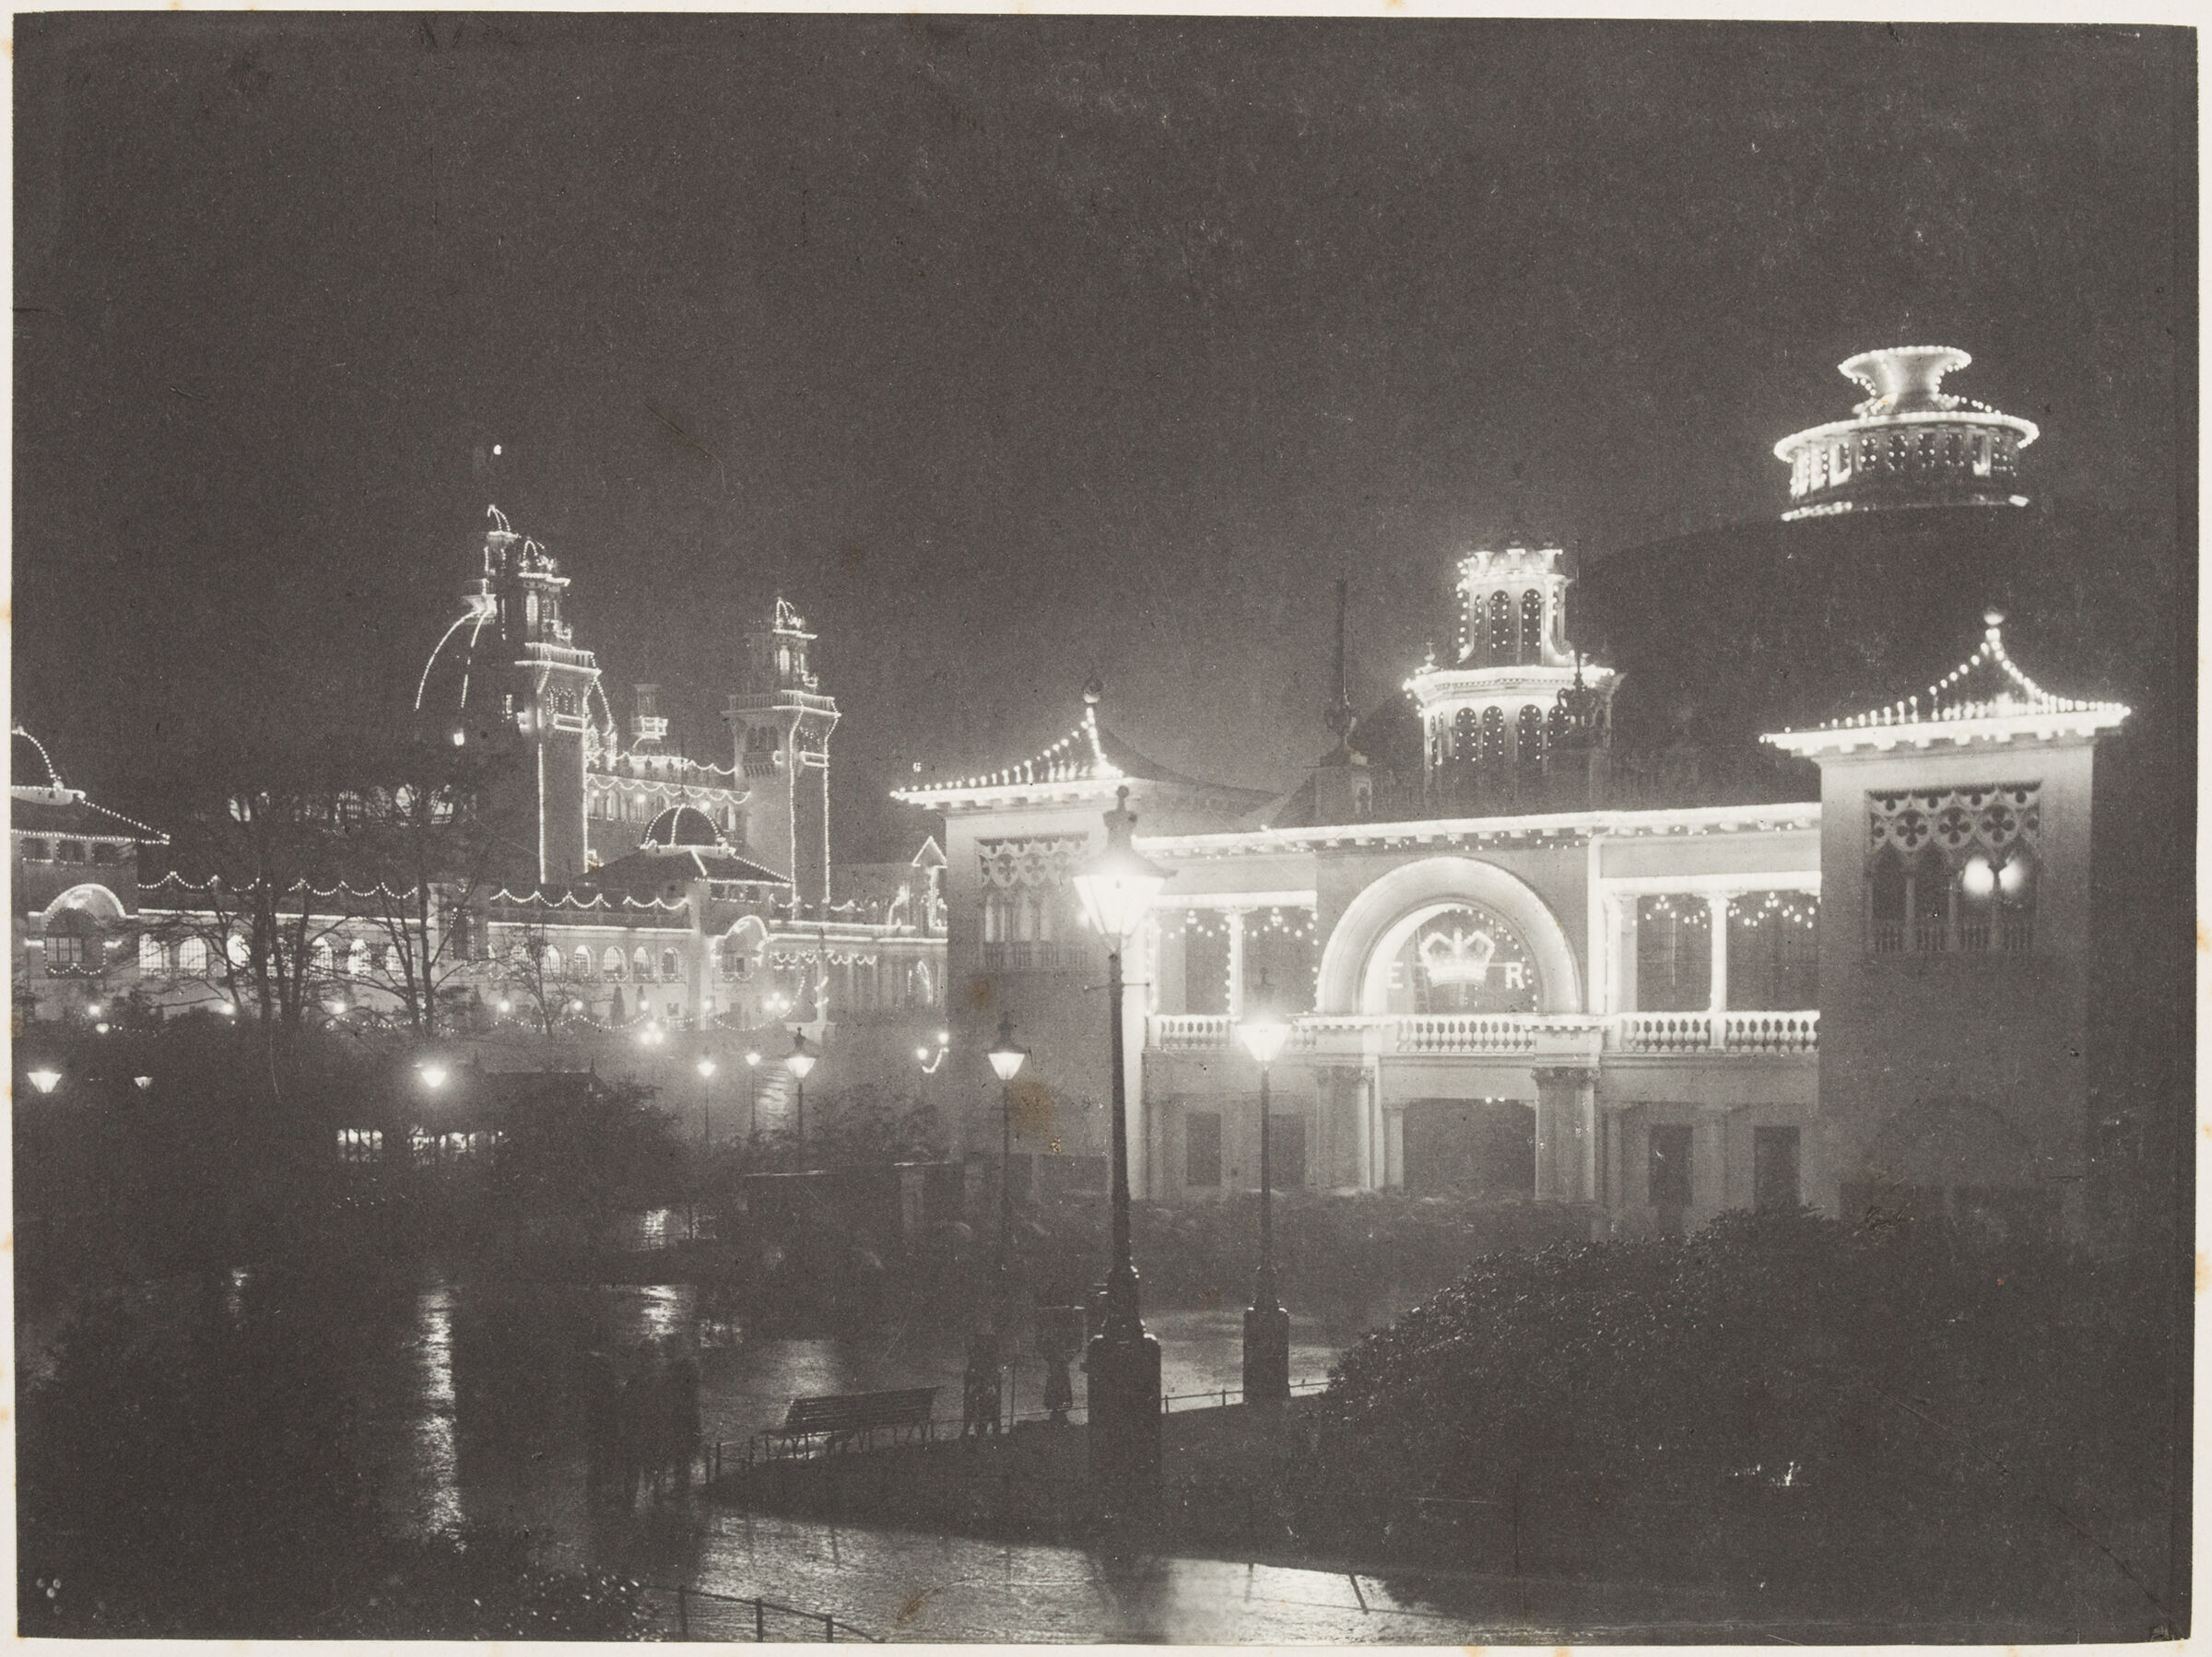 Night View Of Buildings At The Glasgow International Exhibition